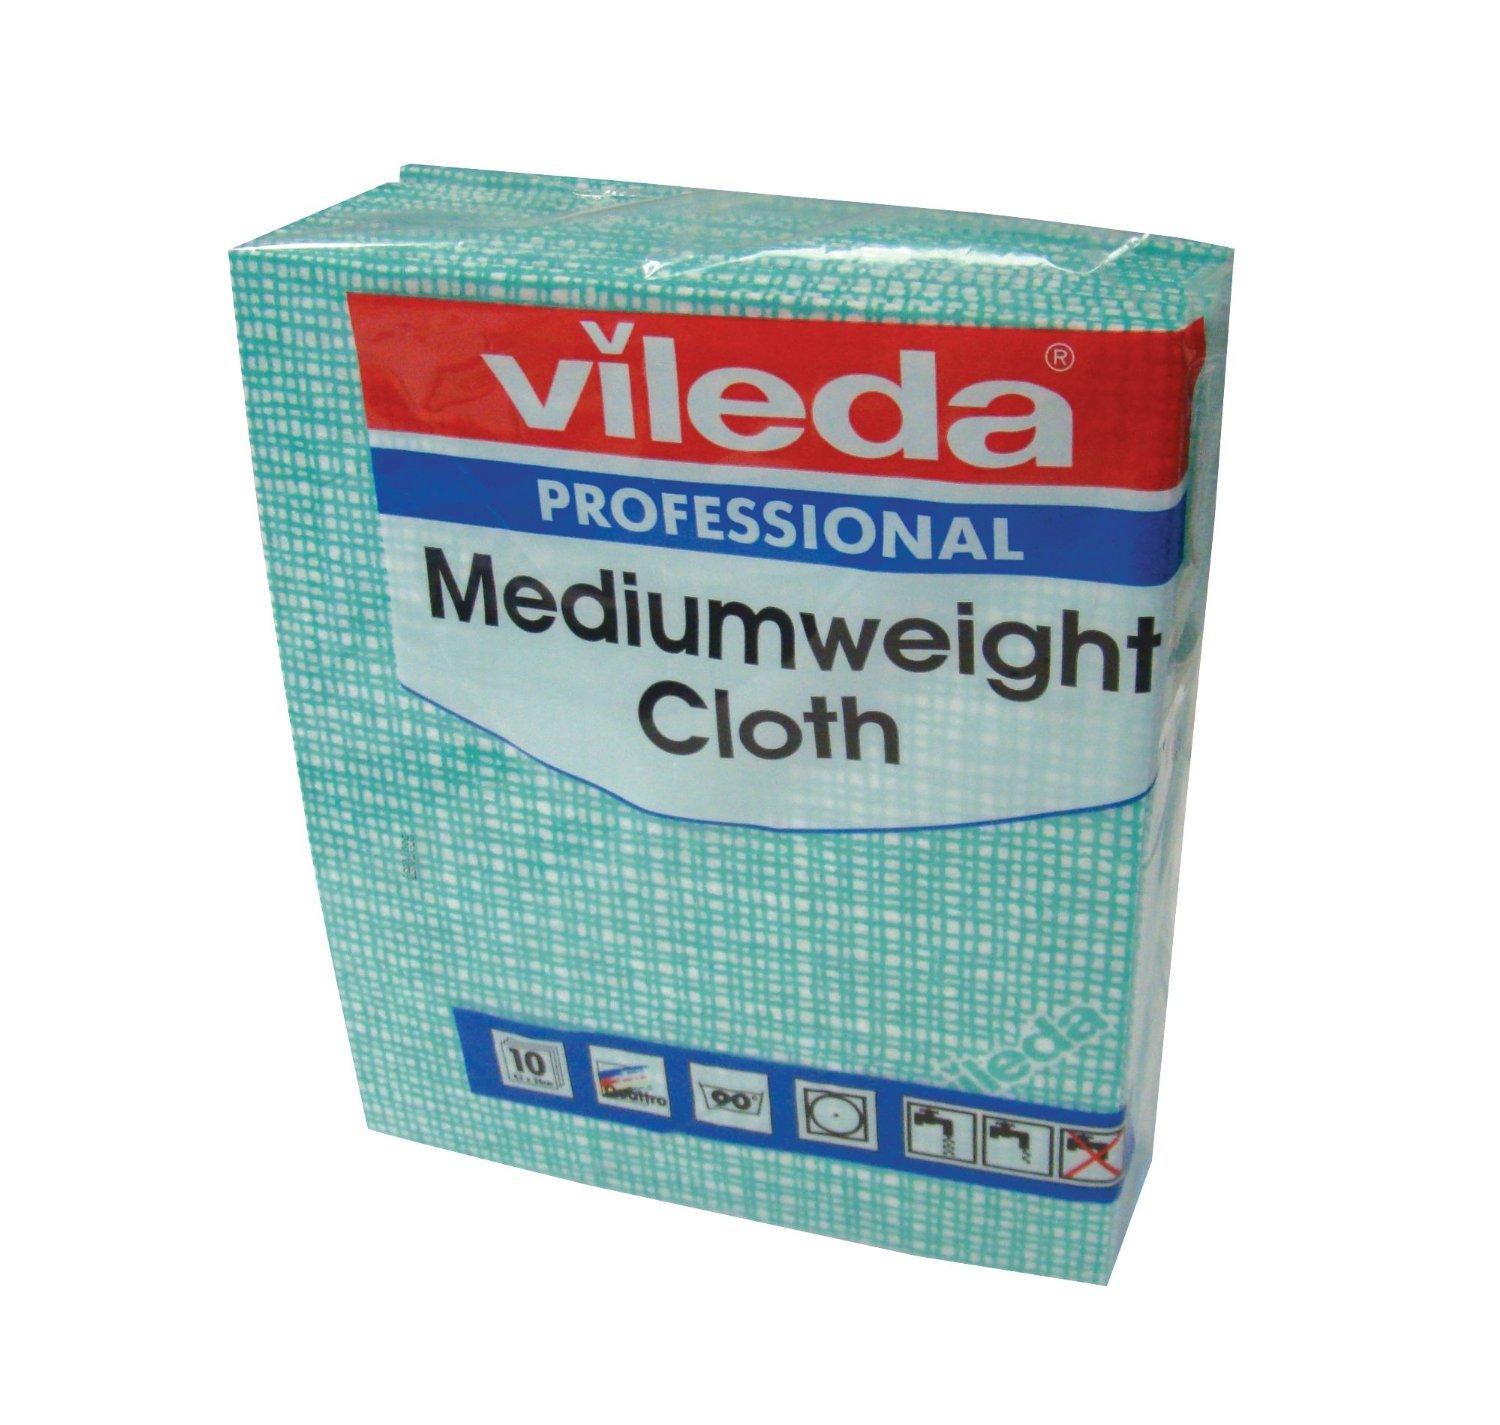 Medium Weight Green Vileda Cloth 10pk - One Stop Cleaning Shop